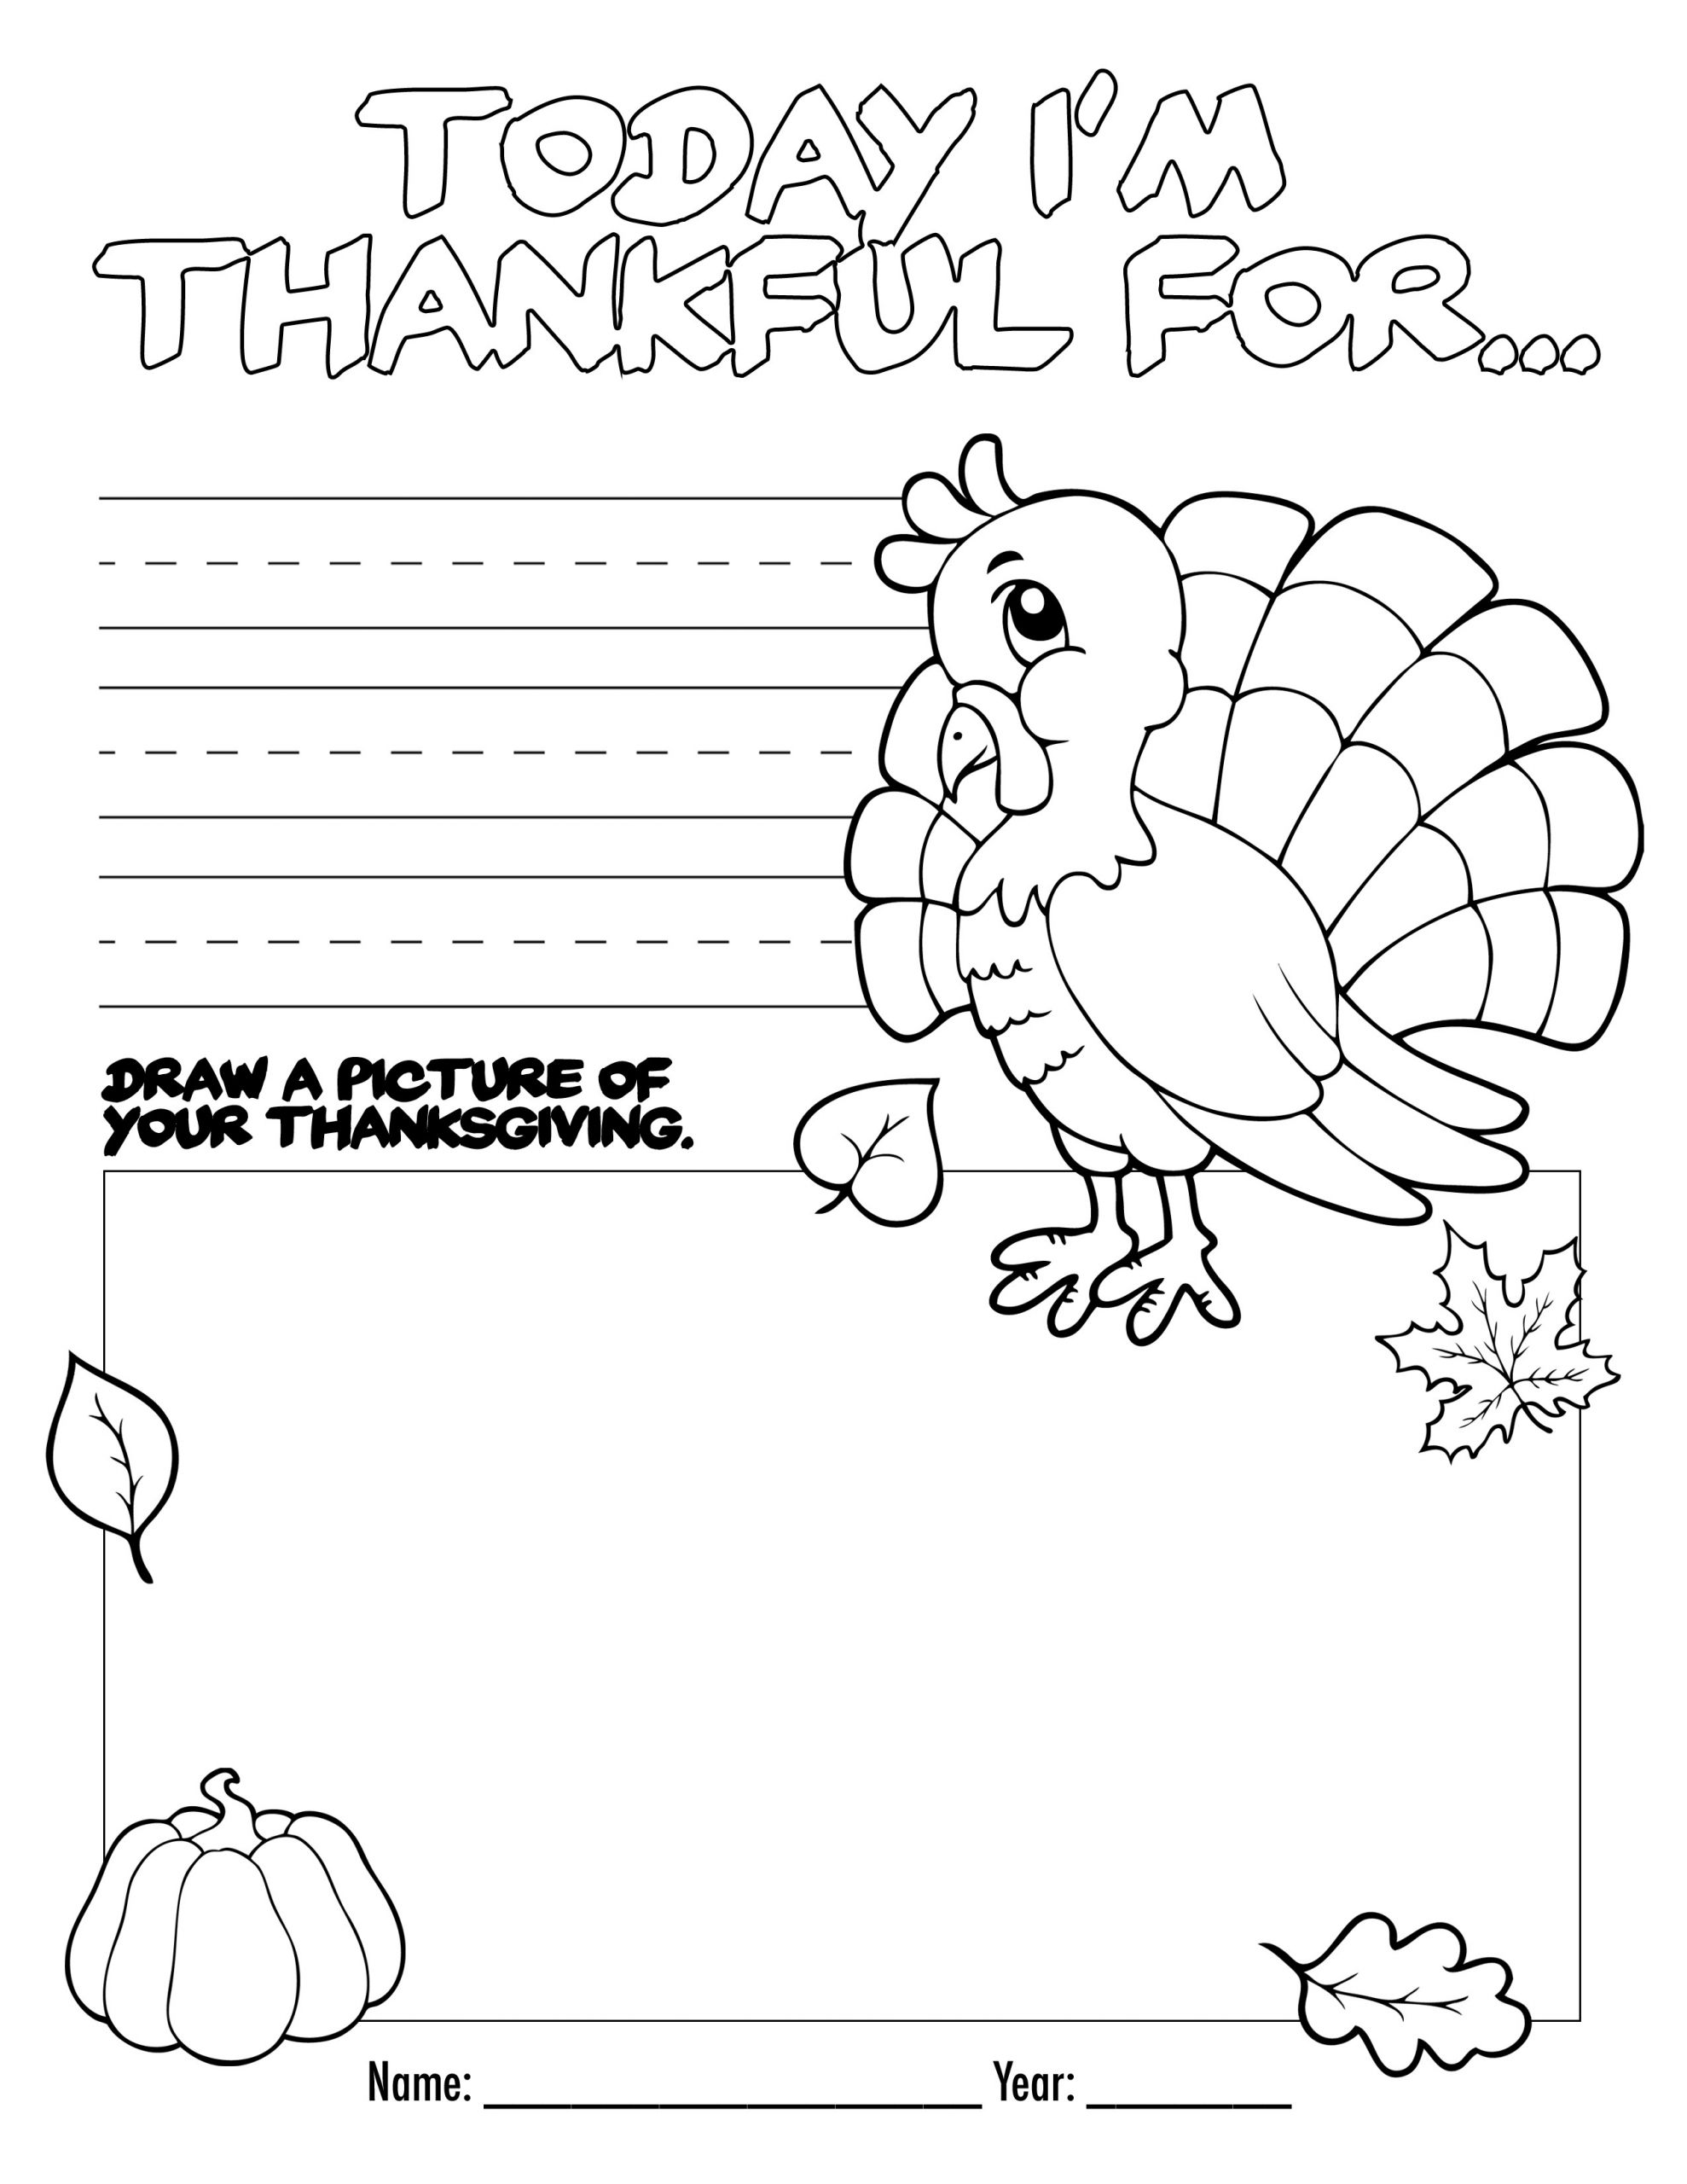 Free Printable Thanksgiving Coloring Pages
 Thanksgiving Coloring Book Free Printable for the Kids